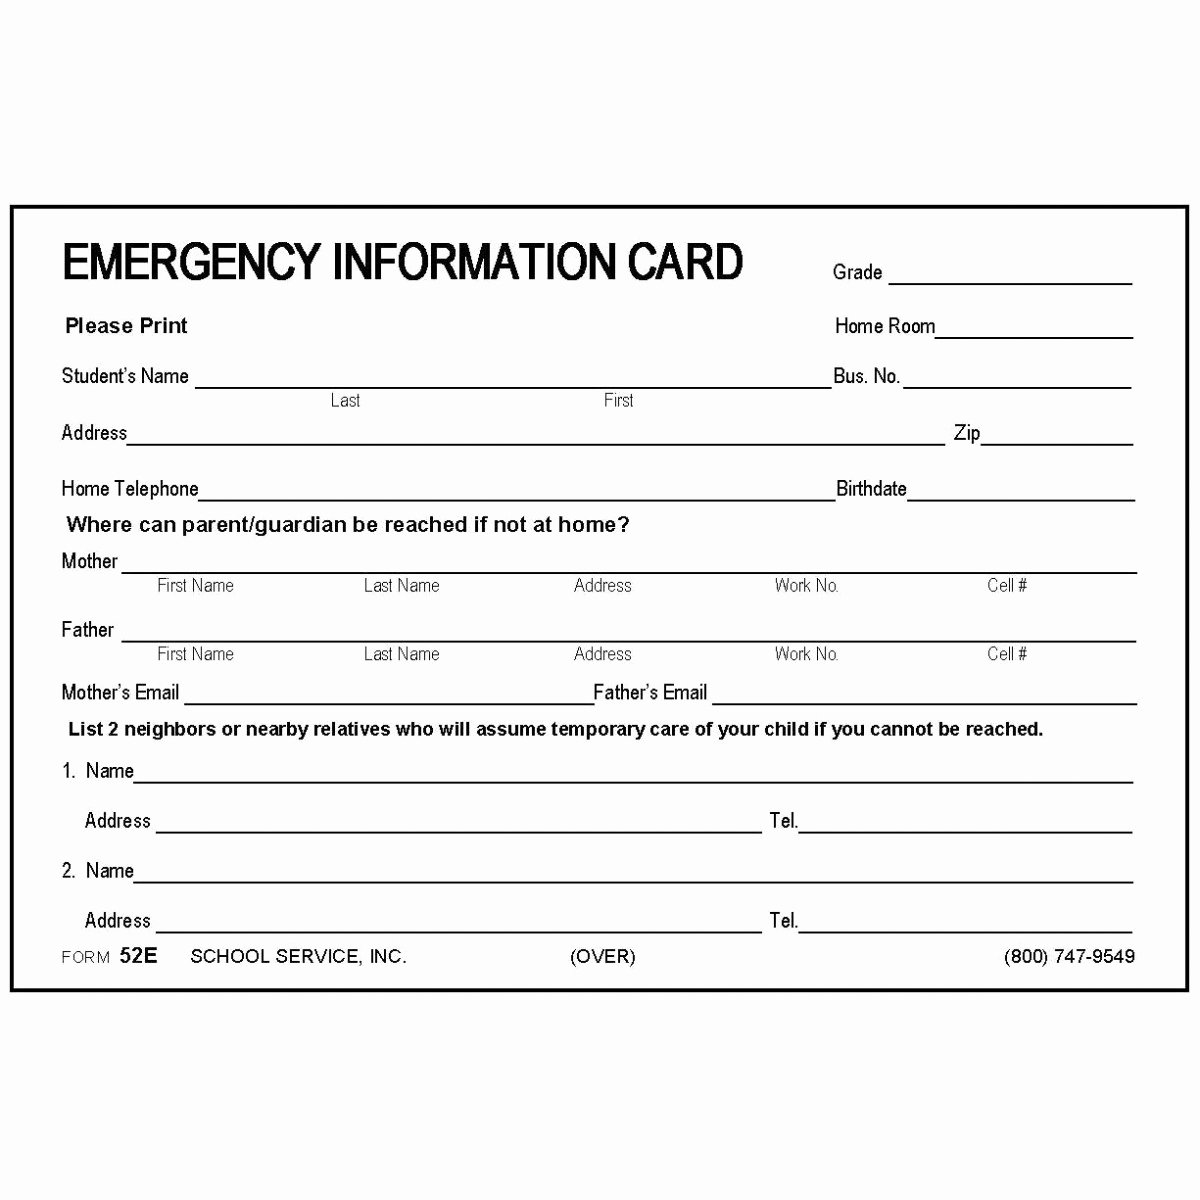 Printable Emergency Contact Card Beautiful 52e Emergency Information Card 4 X 6 Size